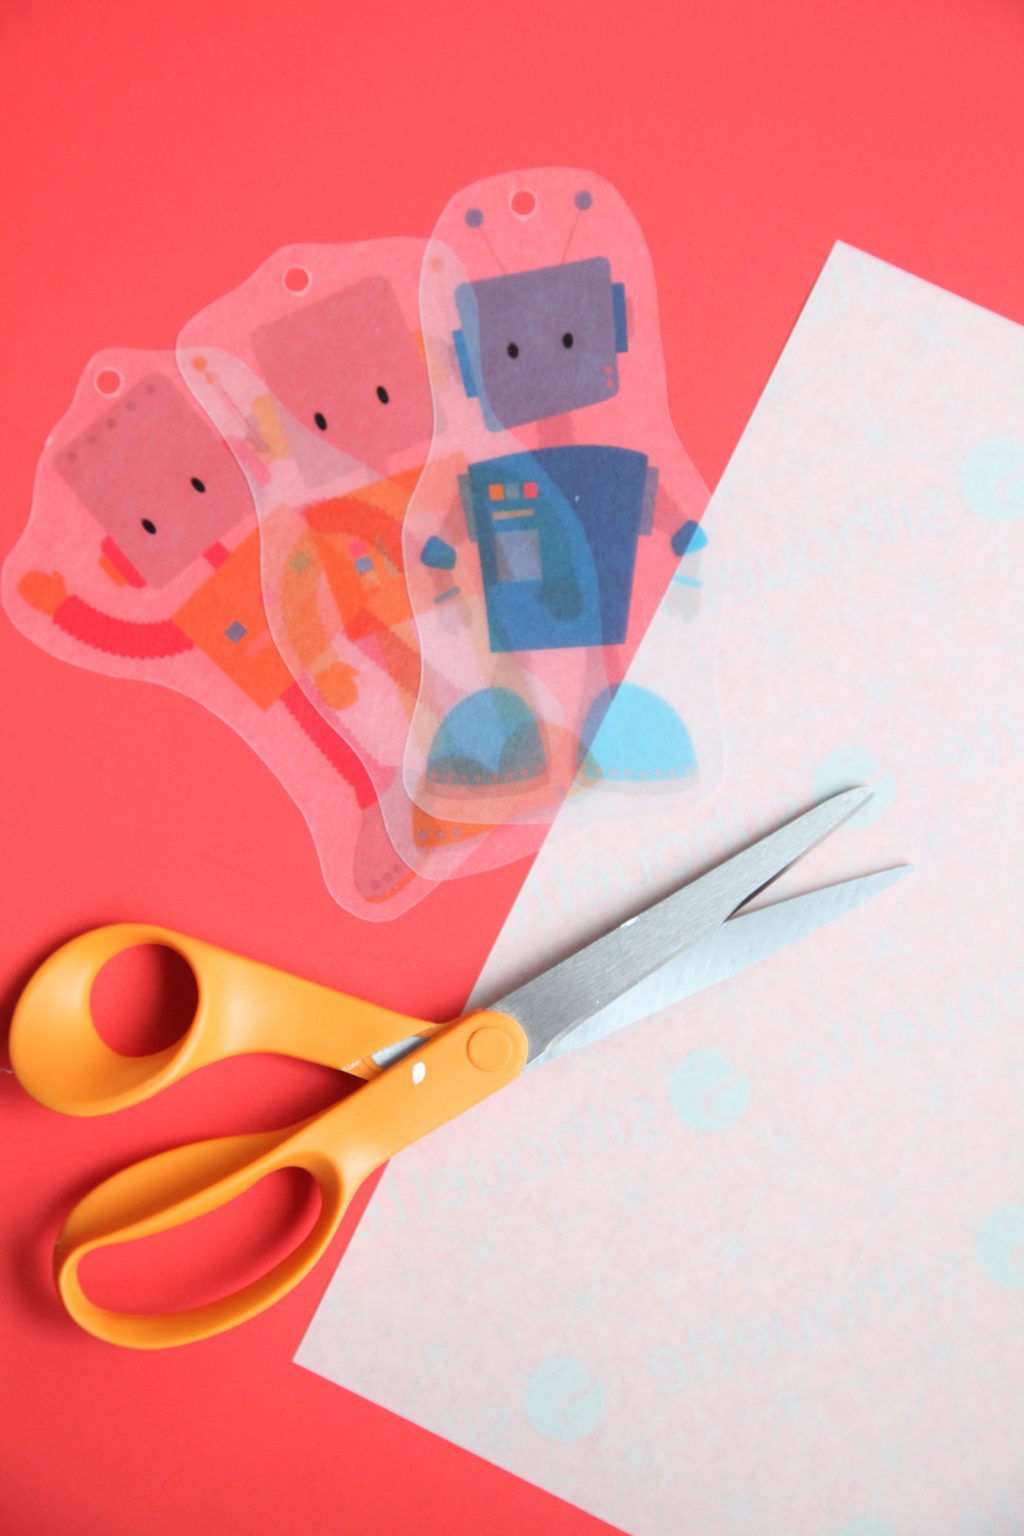 DIY Shrink Plastic Robot Keychain Valentine with Free Printable + a tutorial featured by Top US Craft Blog + The Pretty Life Girls